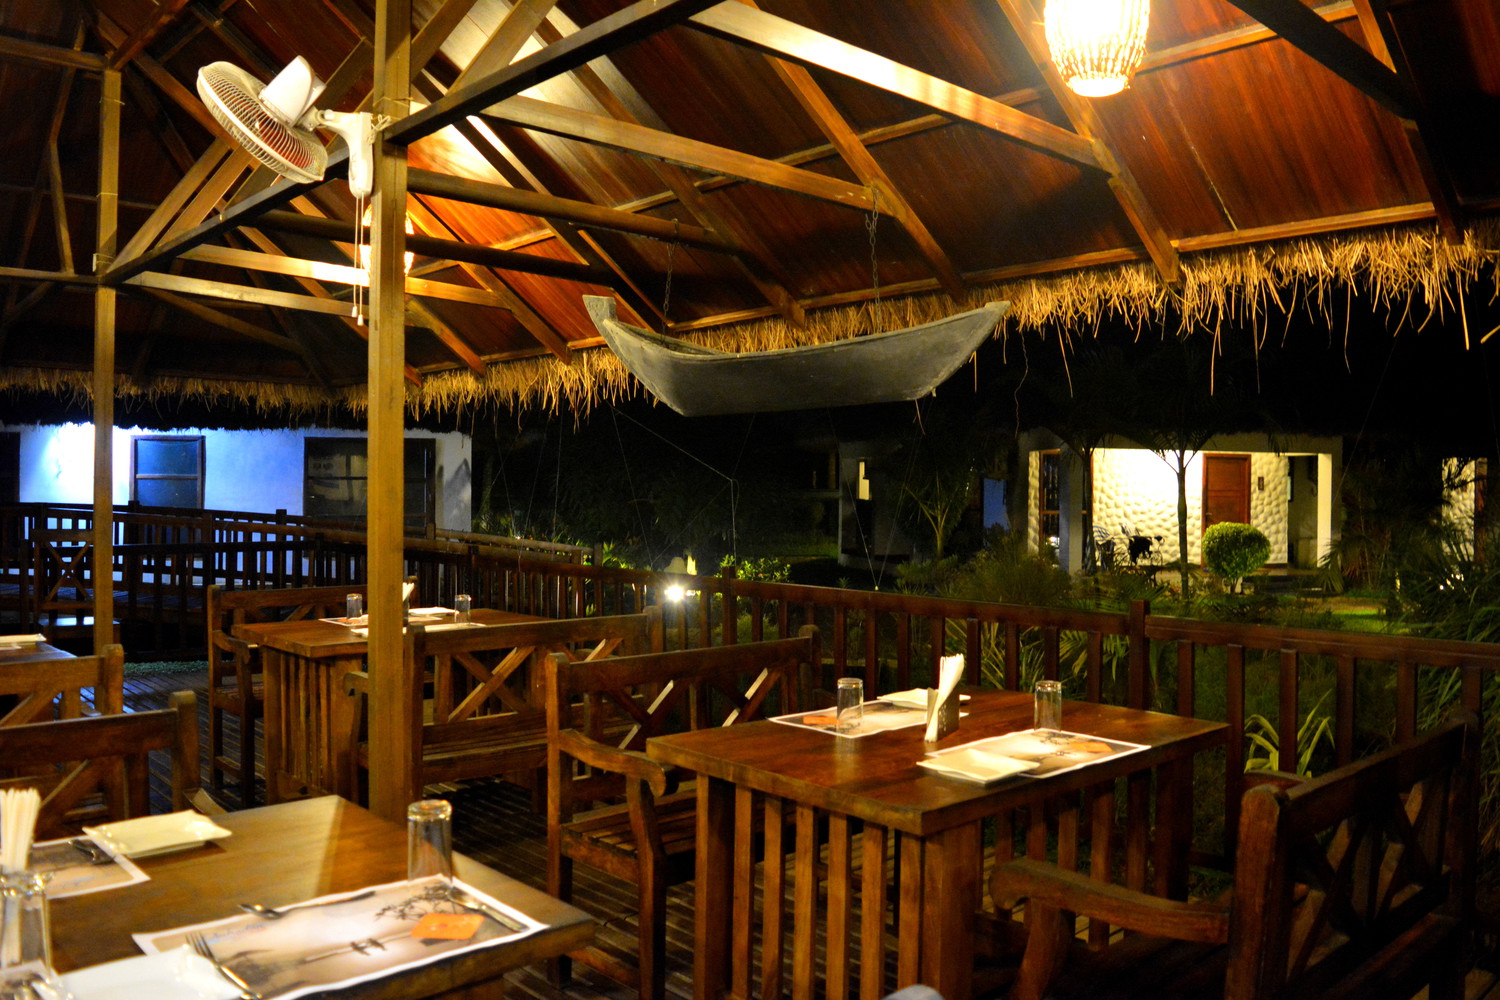 Interior of a floating restaurant with a small boat hanging at the top from the ceiling and wooden chairs and tables dimly lit in the evening